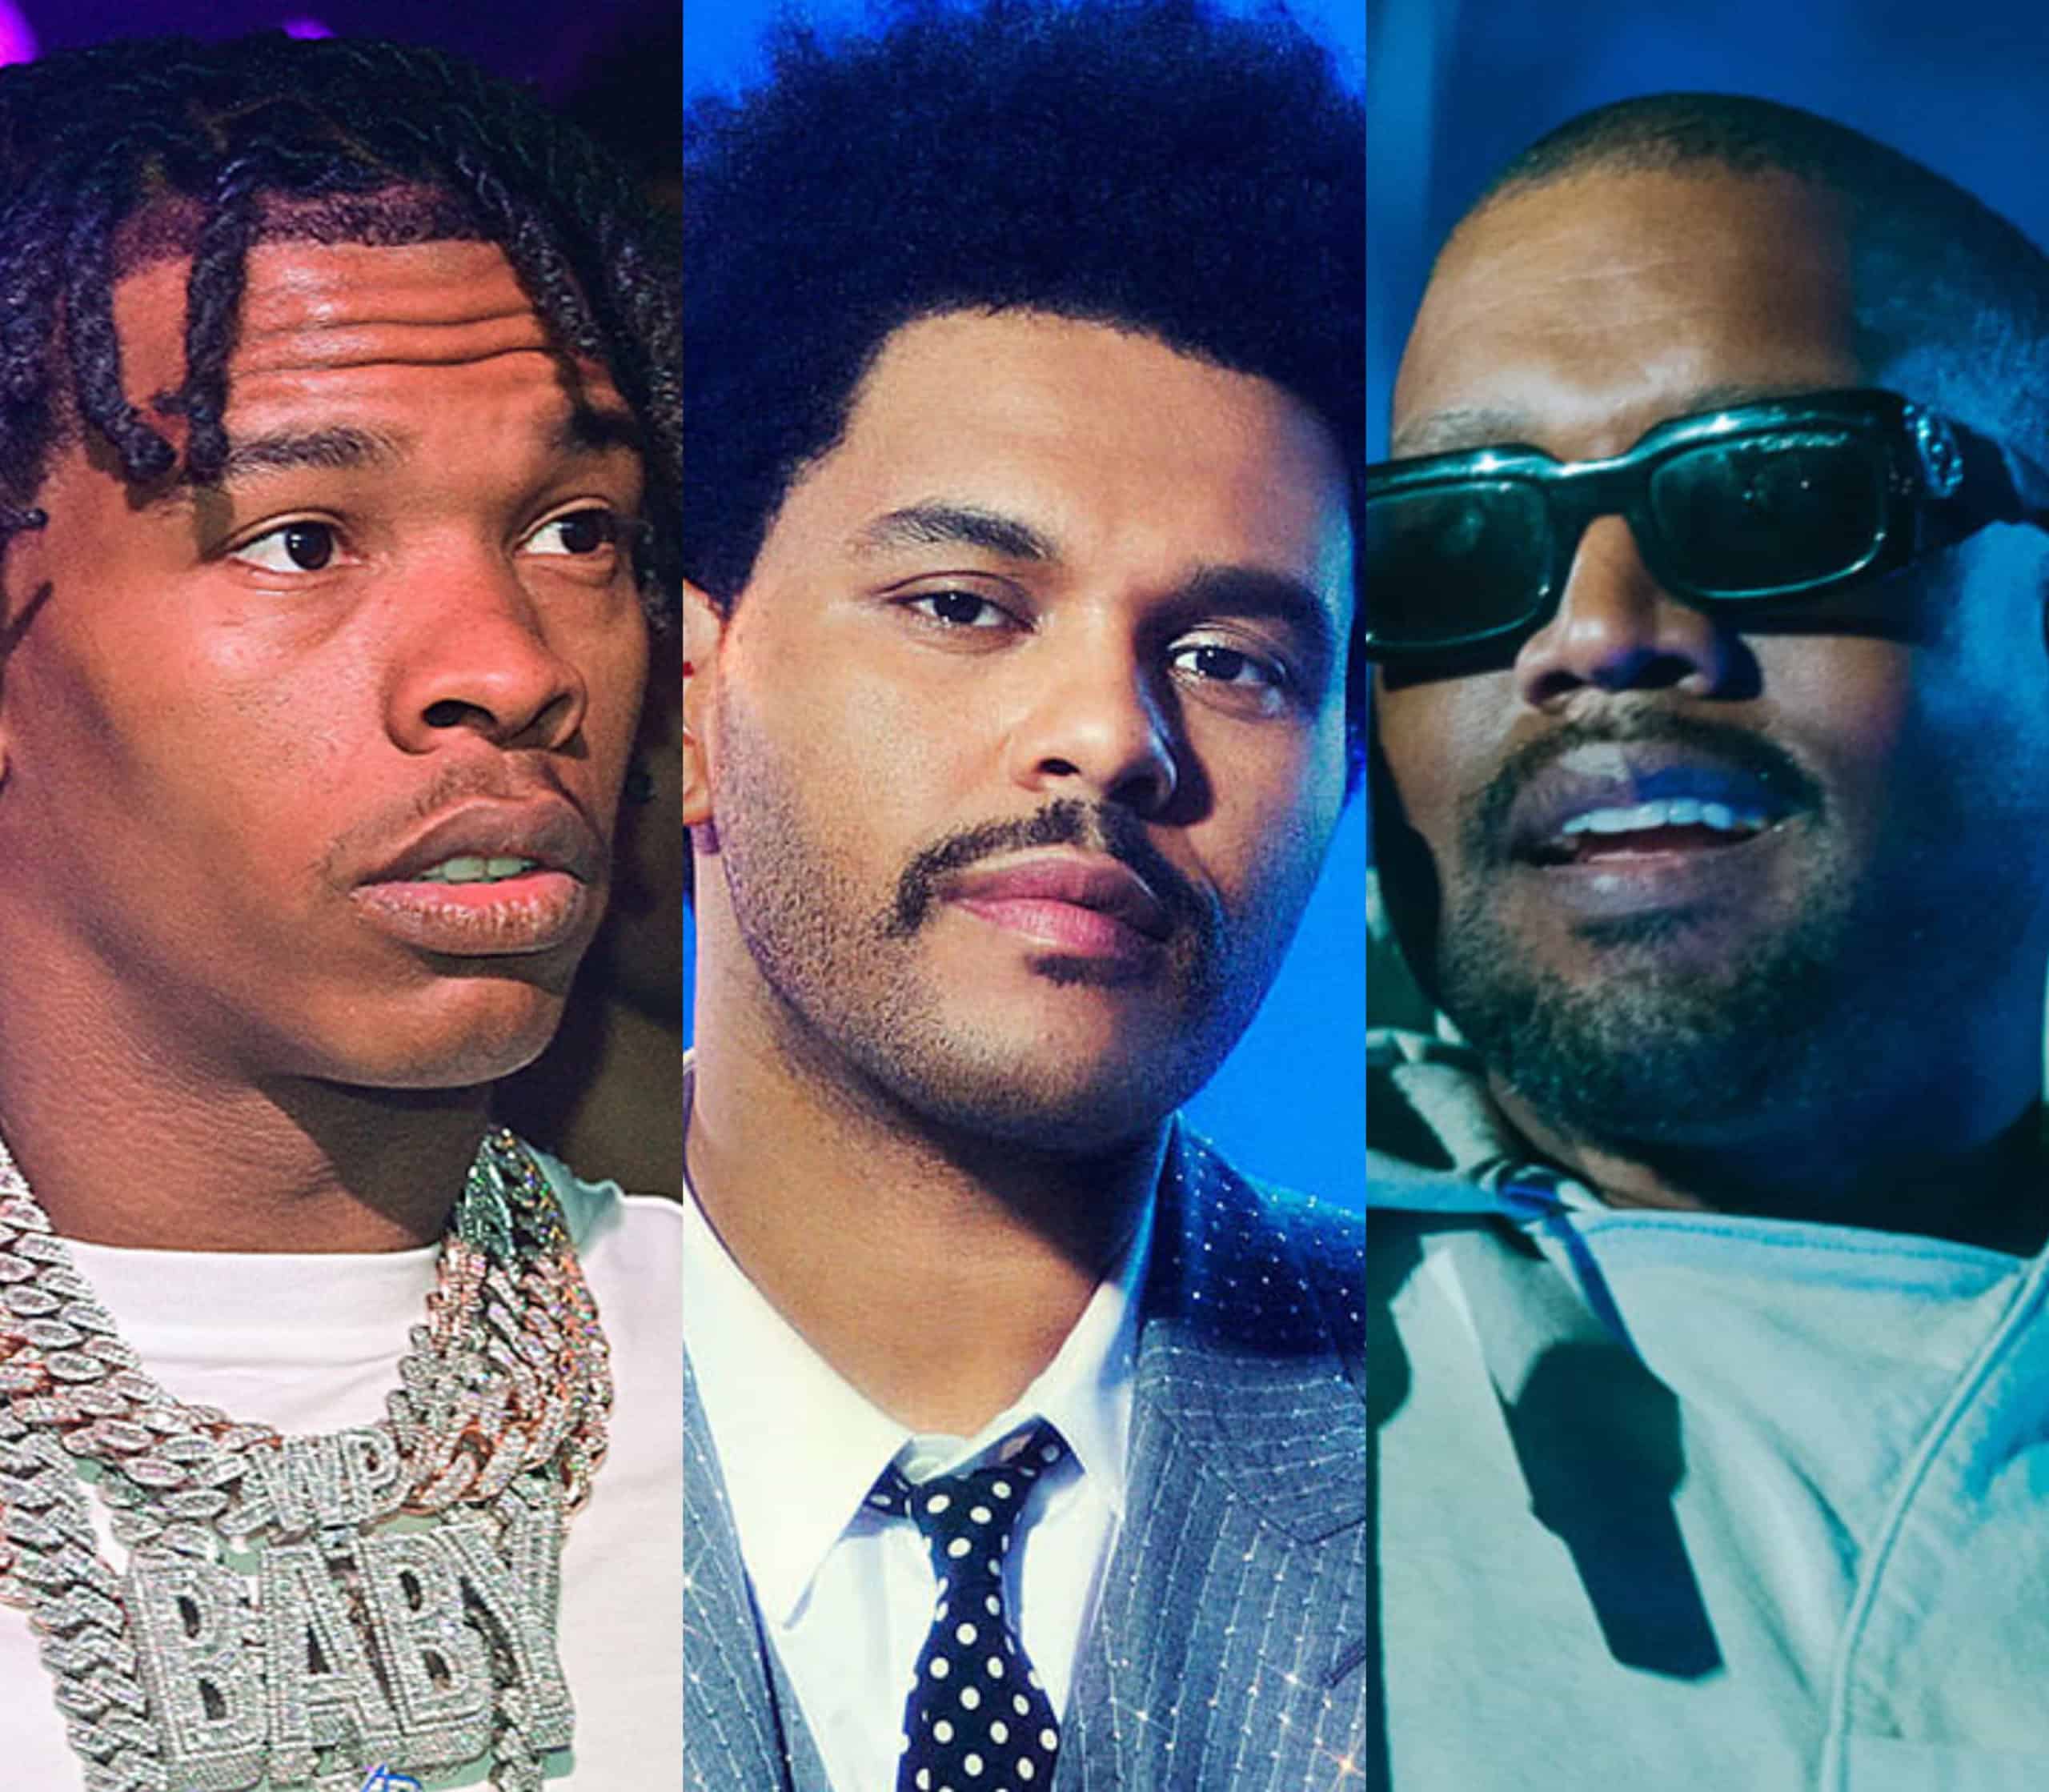 Kanye West, The Weeknd & Lil Baby's Hurricane Is Now Certified Platinum